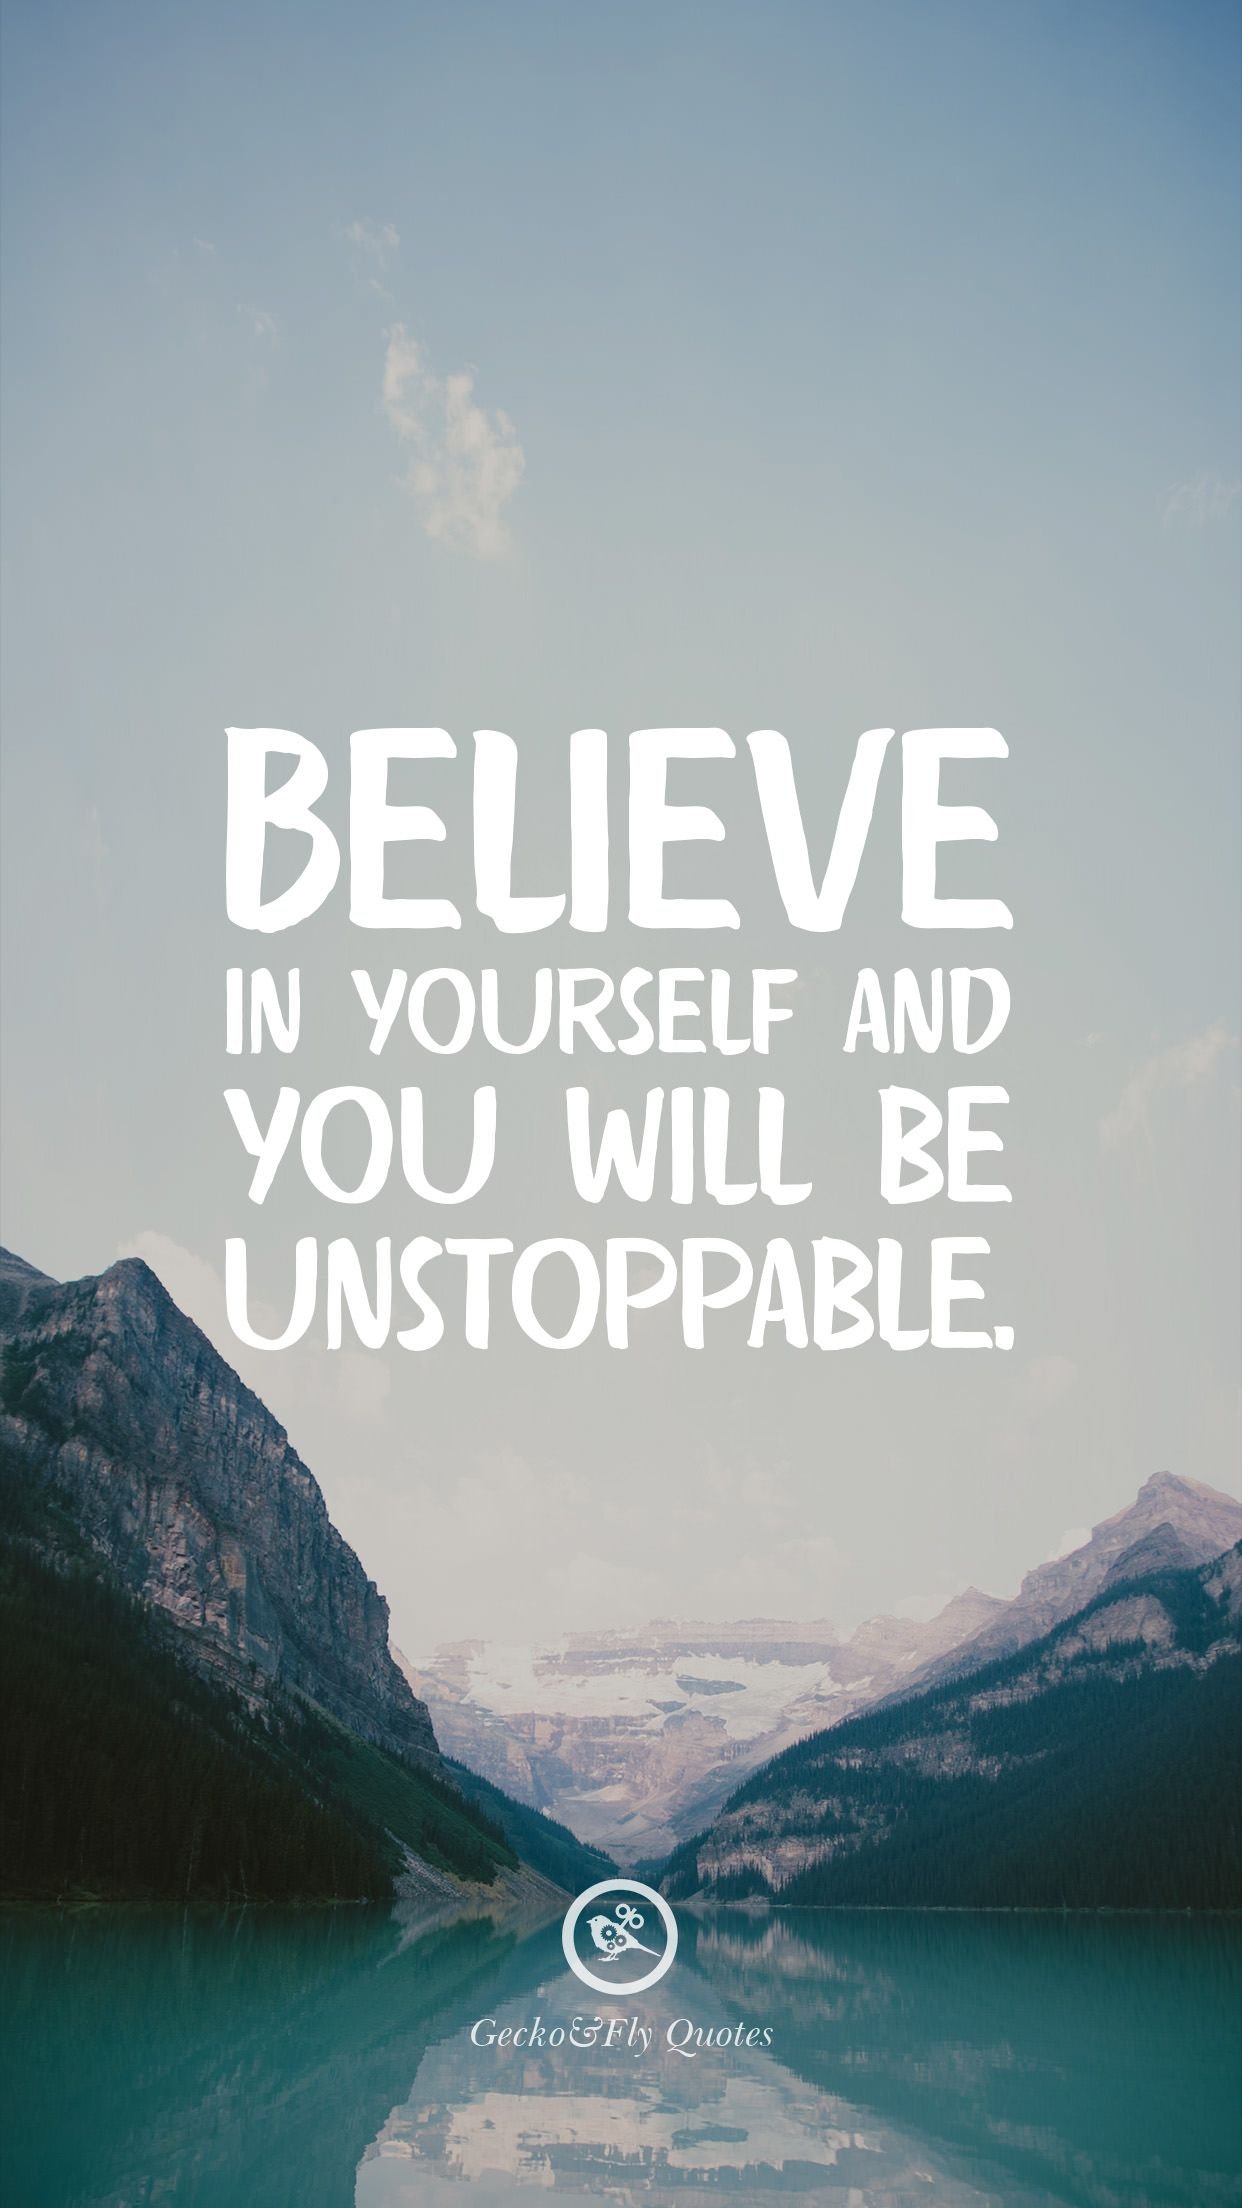 Believe you Wallpapers Download | MobCup